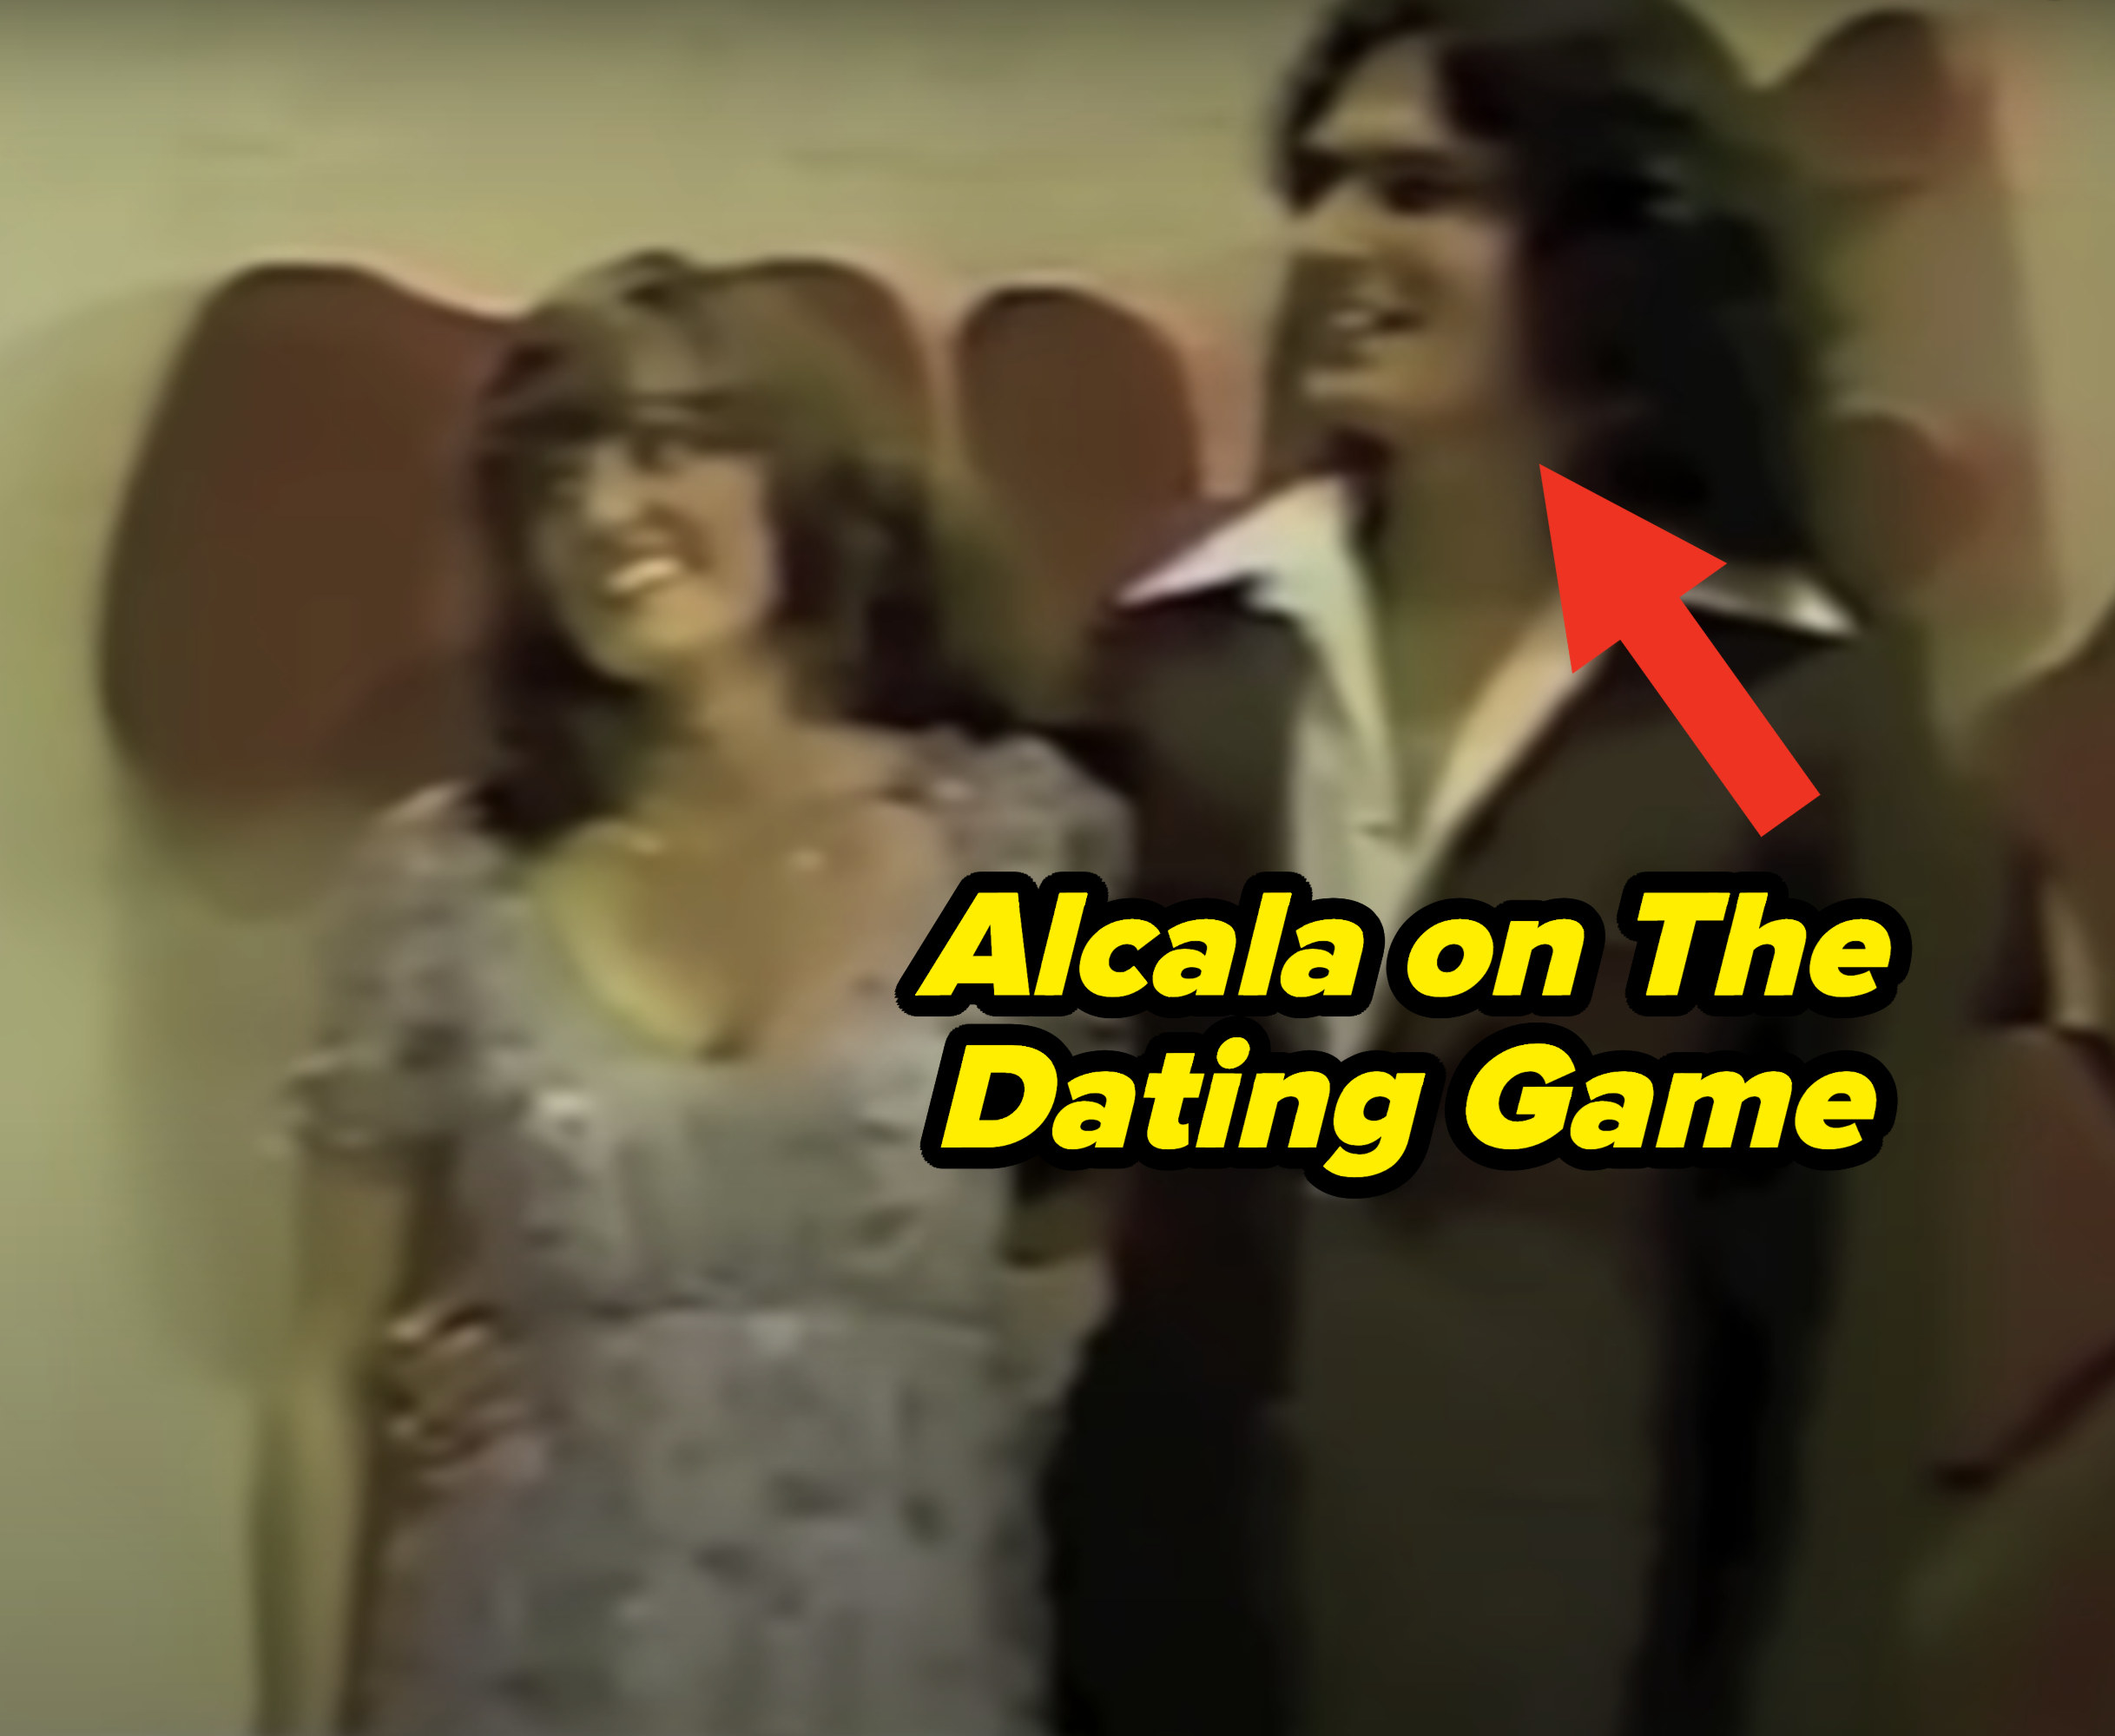 an arrow pointing to Alcala on the dating show with his arm around a woman